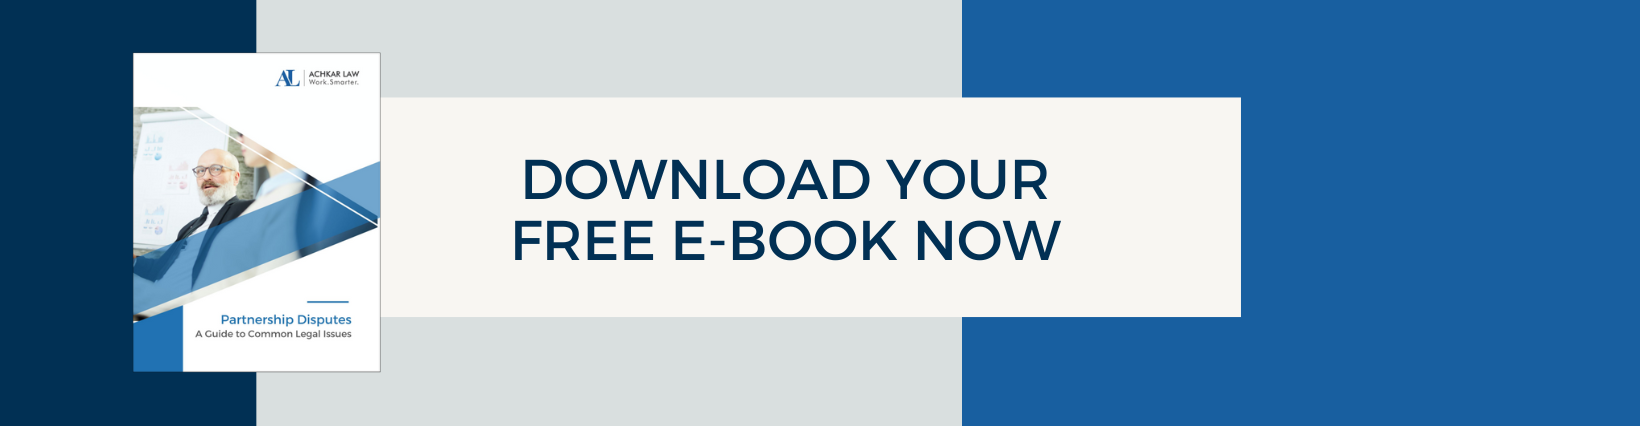 download free ebook Partnership Disputes A Guide to Common Legal Issues